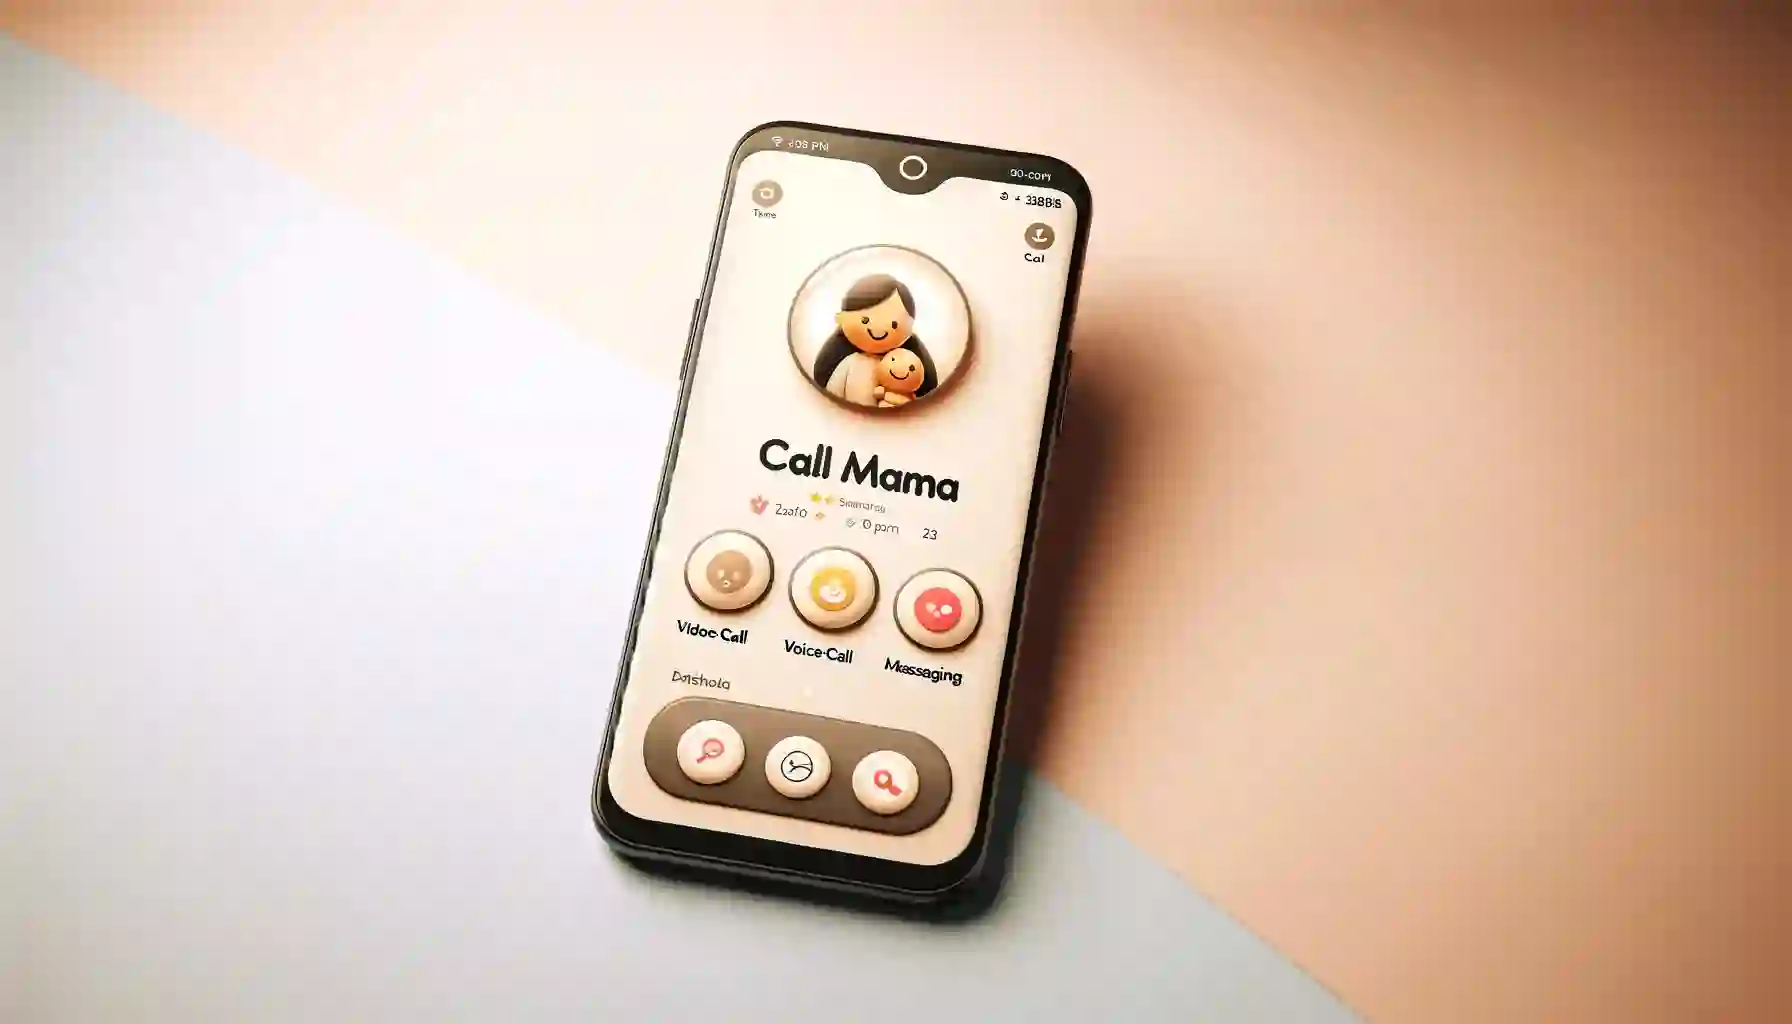 iPhone with Callmama app on the screen